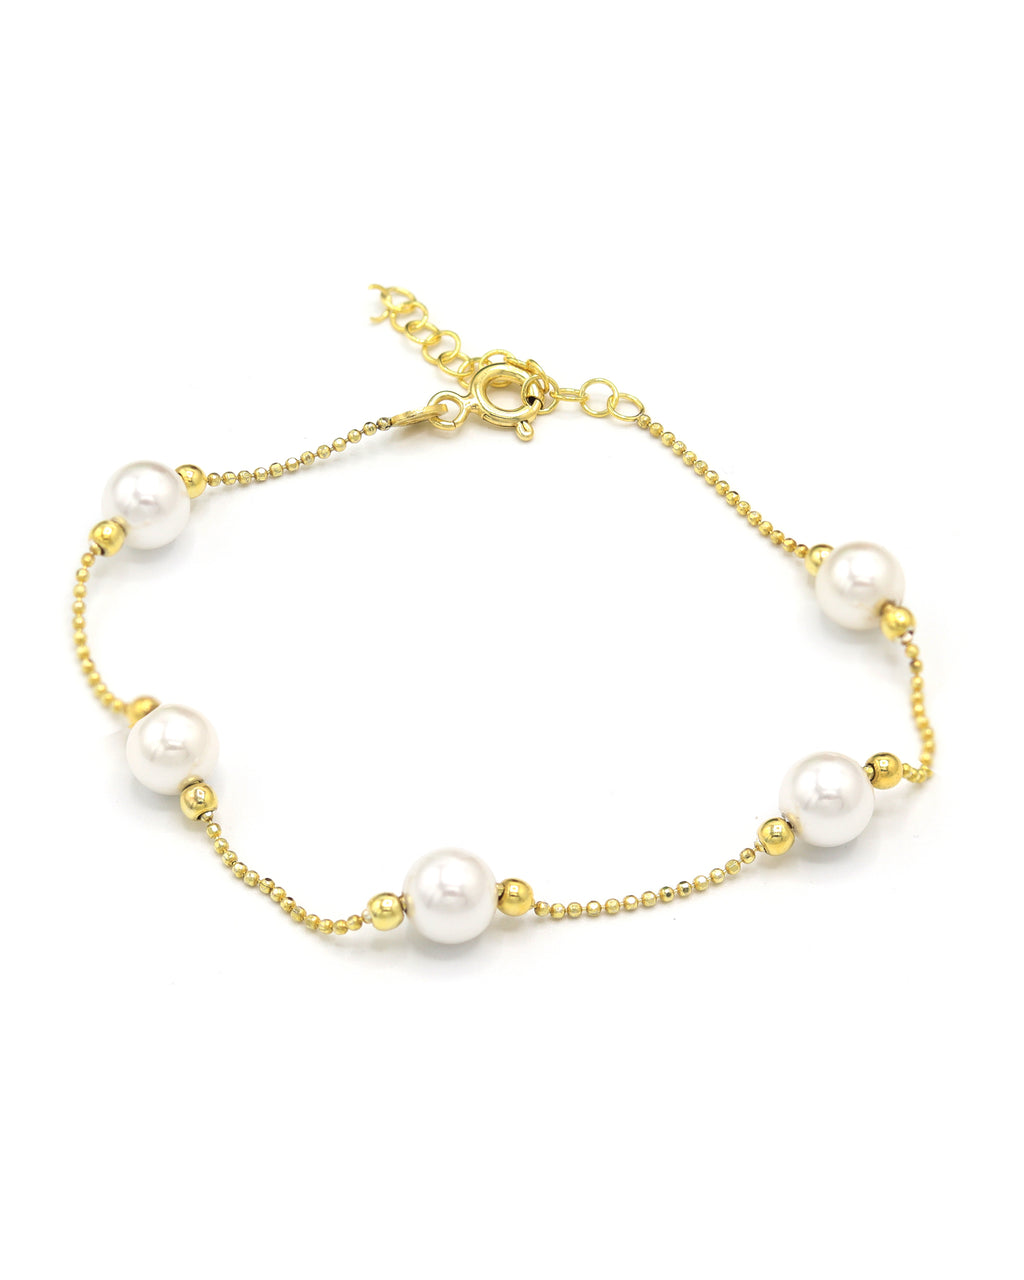 Ball Chain Model Handmade Silver Bracelet With Pearl (NG201021536)